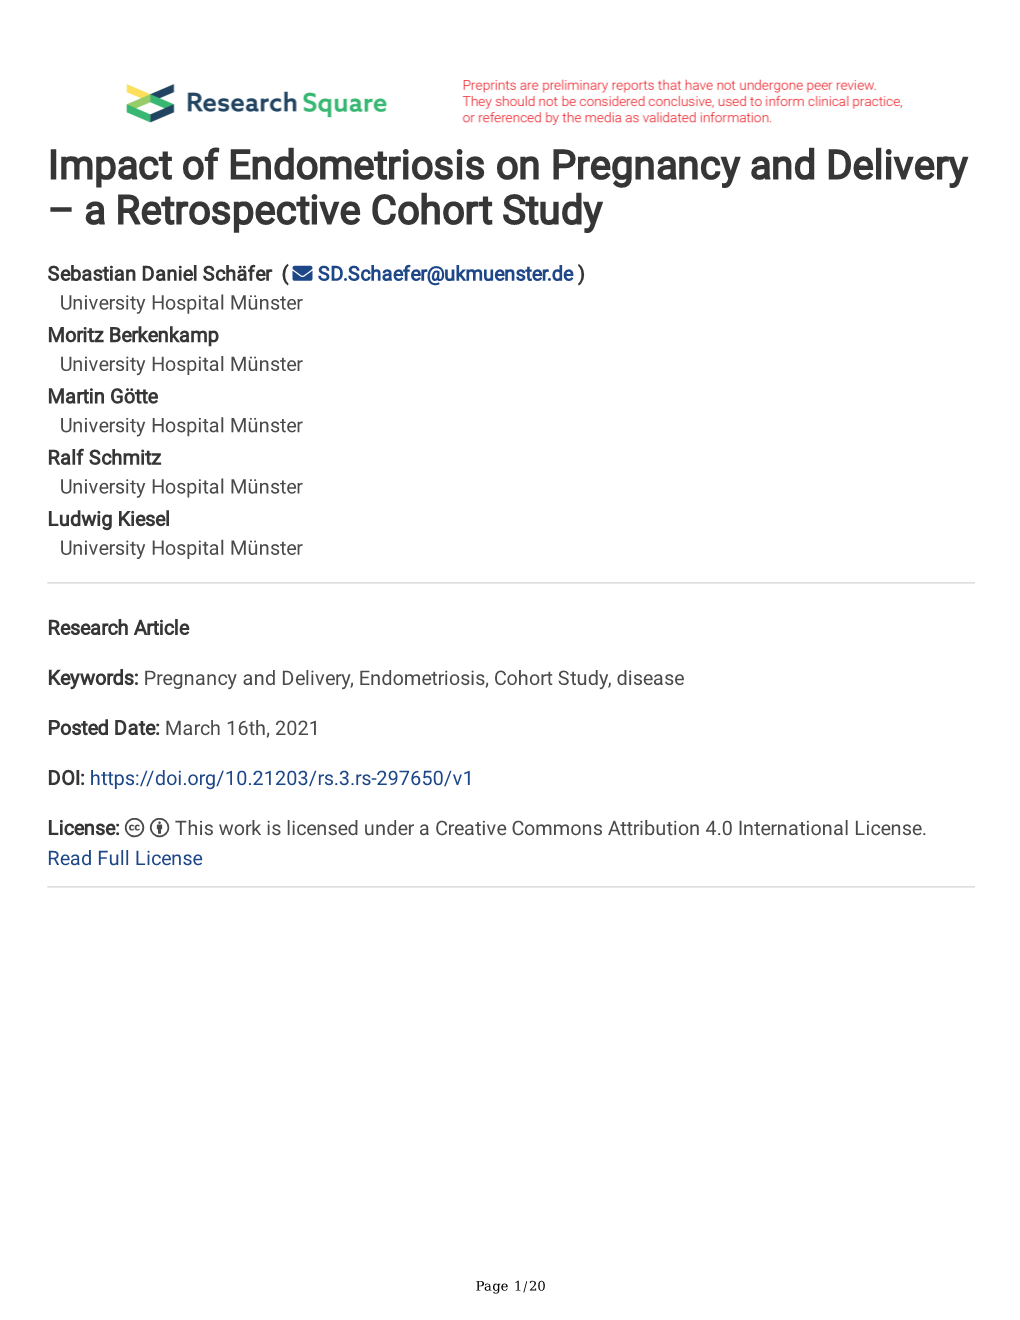 Impact of Endometriosis on Pregnancy and Delivery – a Retrospective Cohort Study